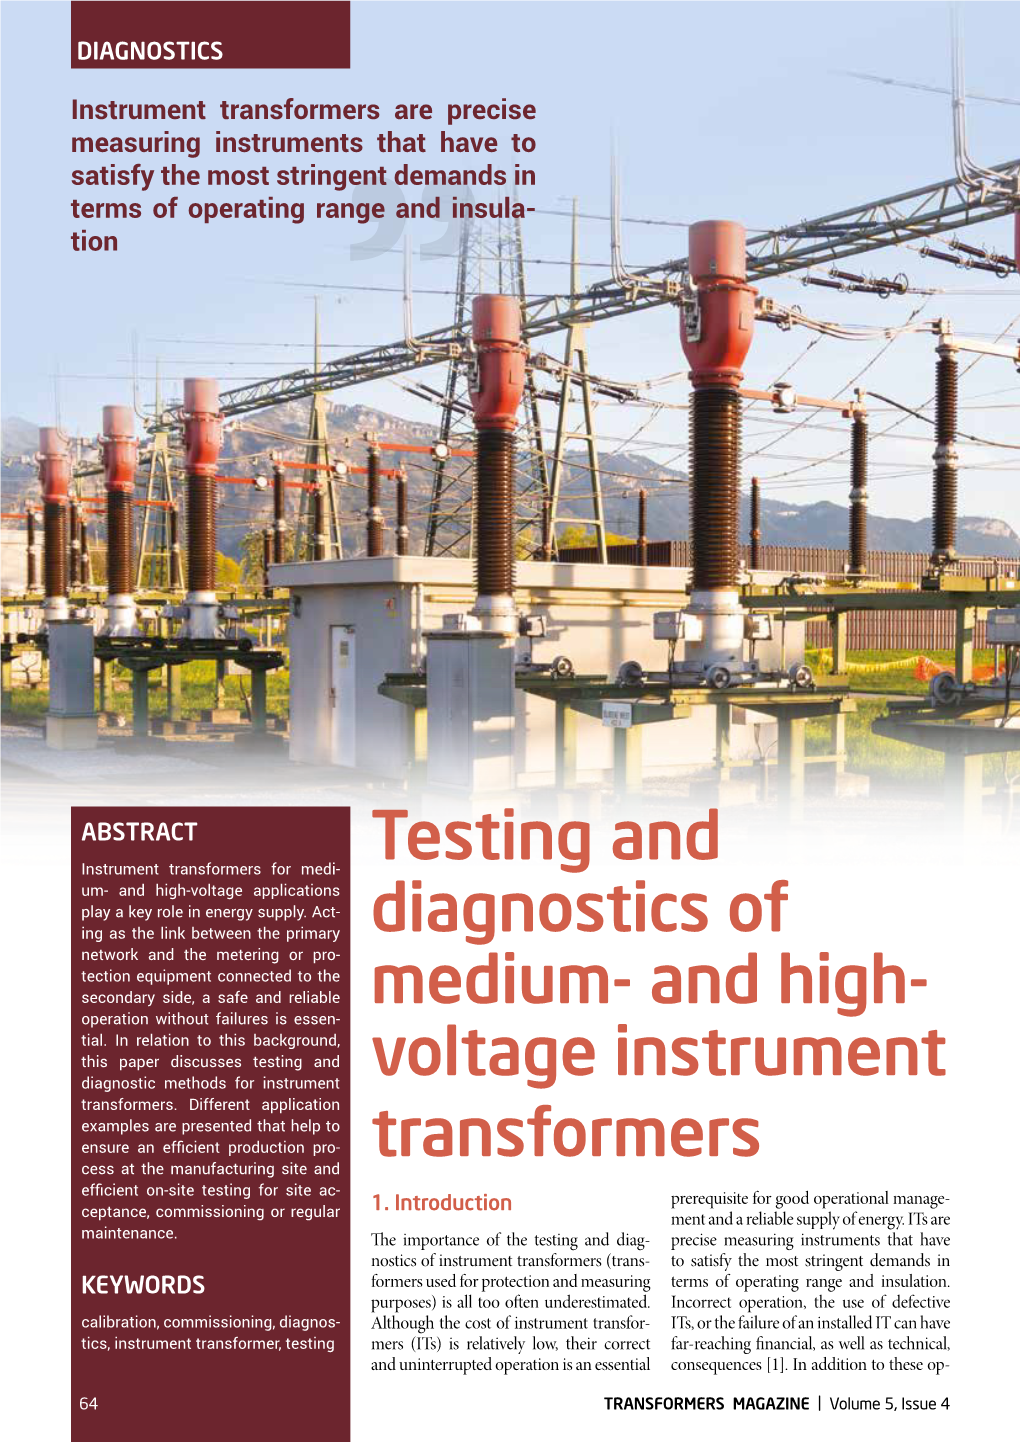 Testing and Diagnosis of Medium- and High Voltage Instrument Transformers